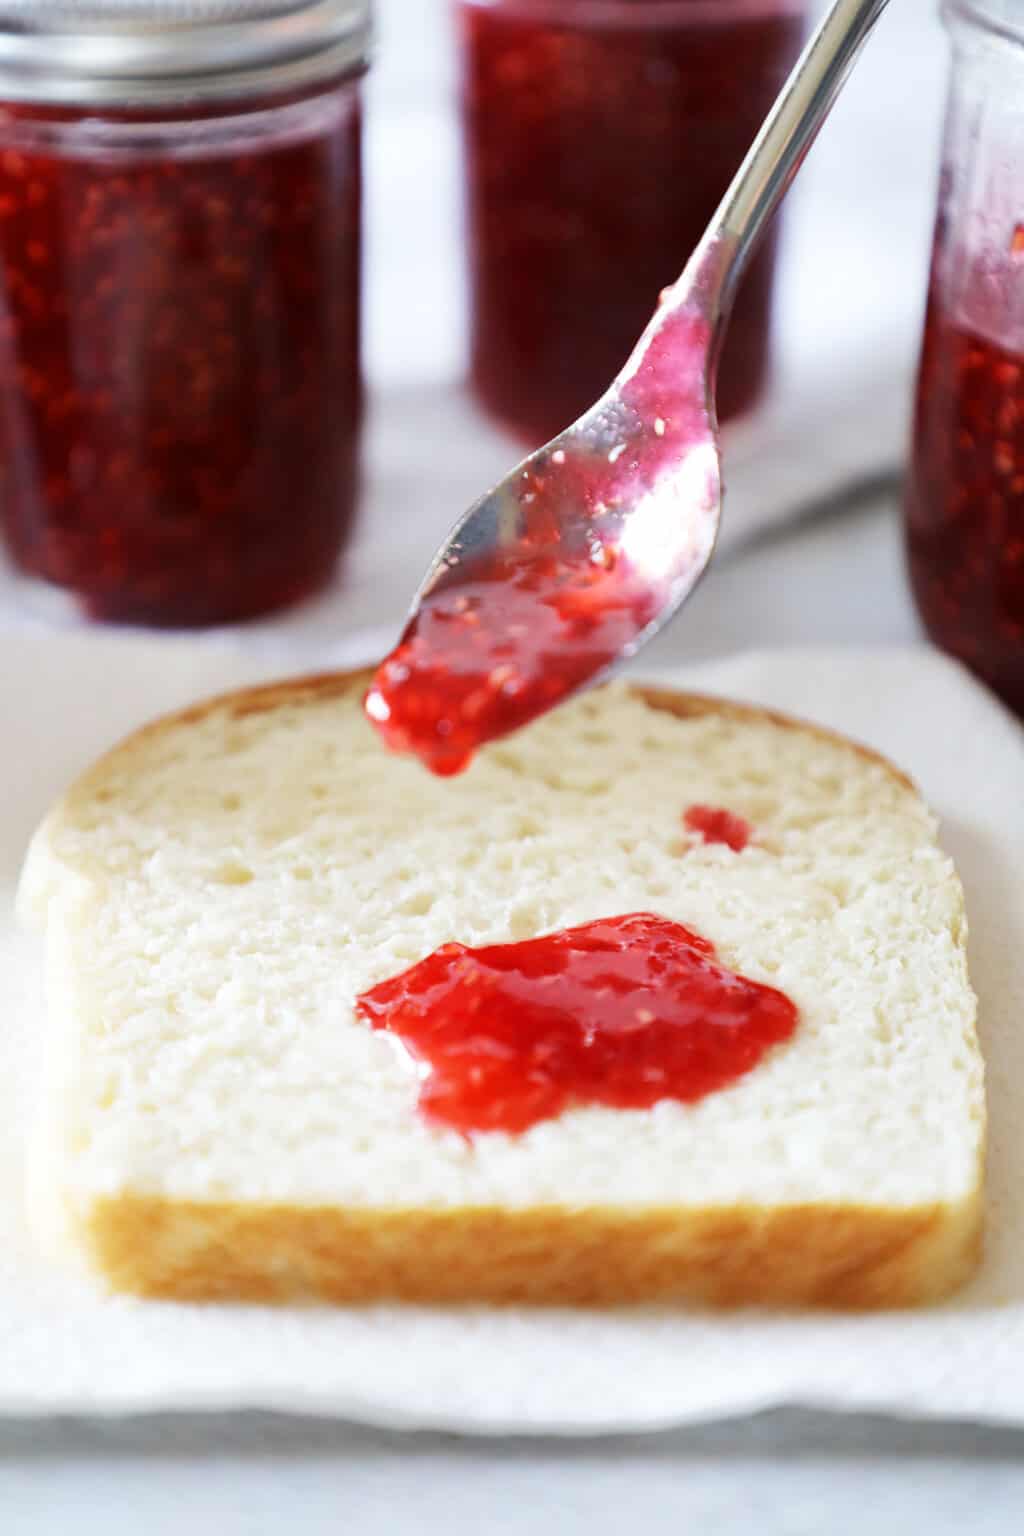 a silver spoon with raspberry jam on it hovering over and dripping onto a piece of white bread